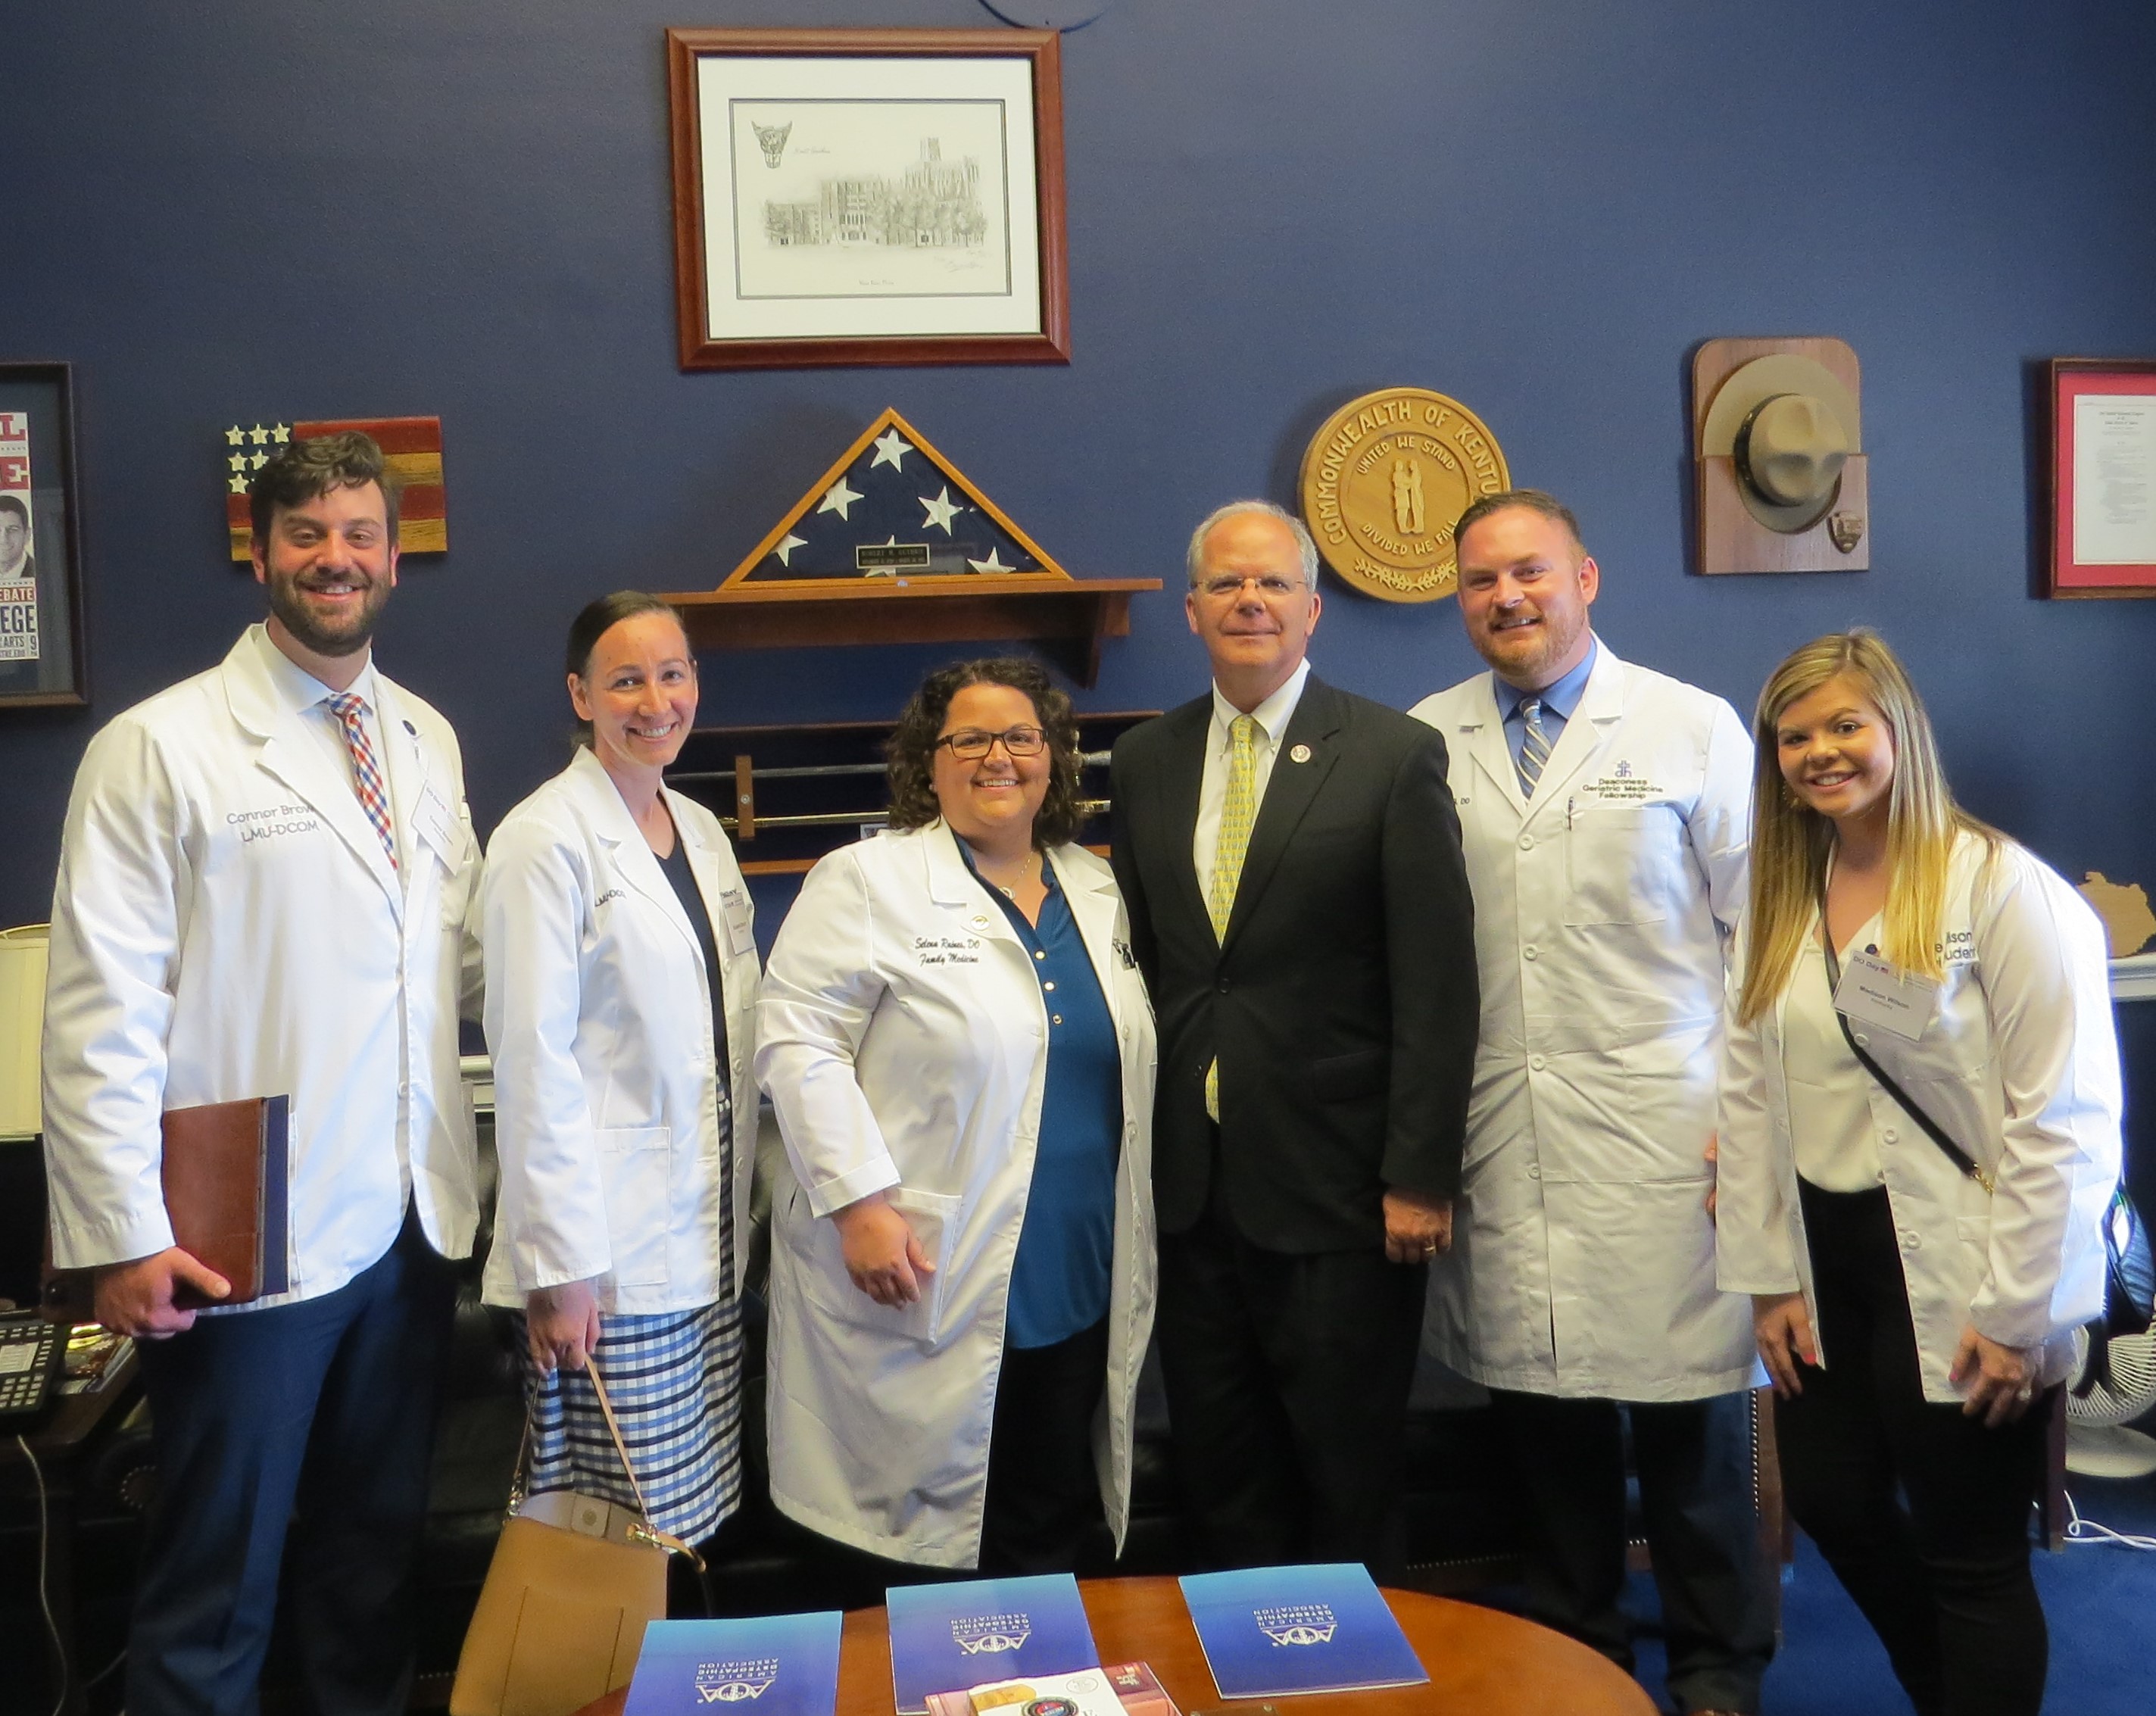 Rep. Guthrie meeting with the Kentucky Osteopathic Medical Association on policy that impacts their profession